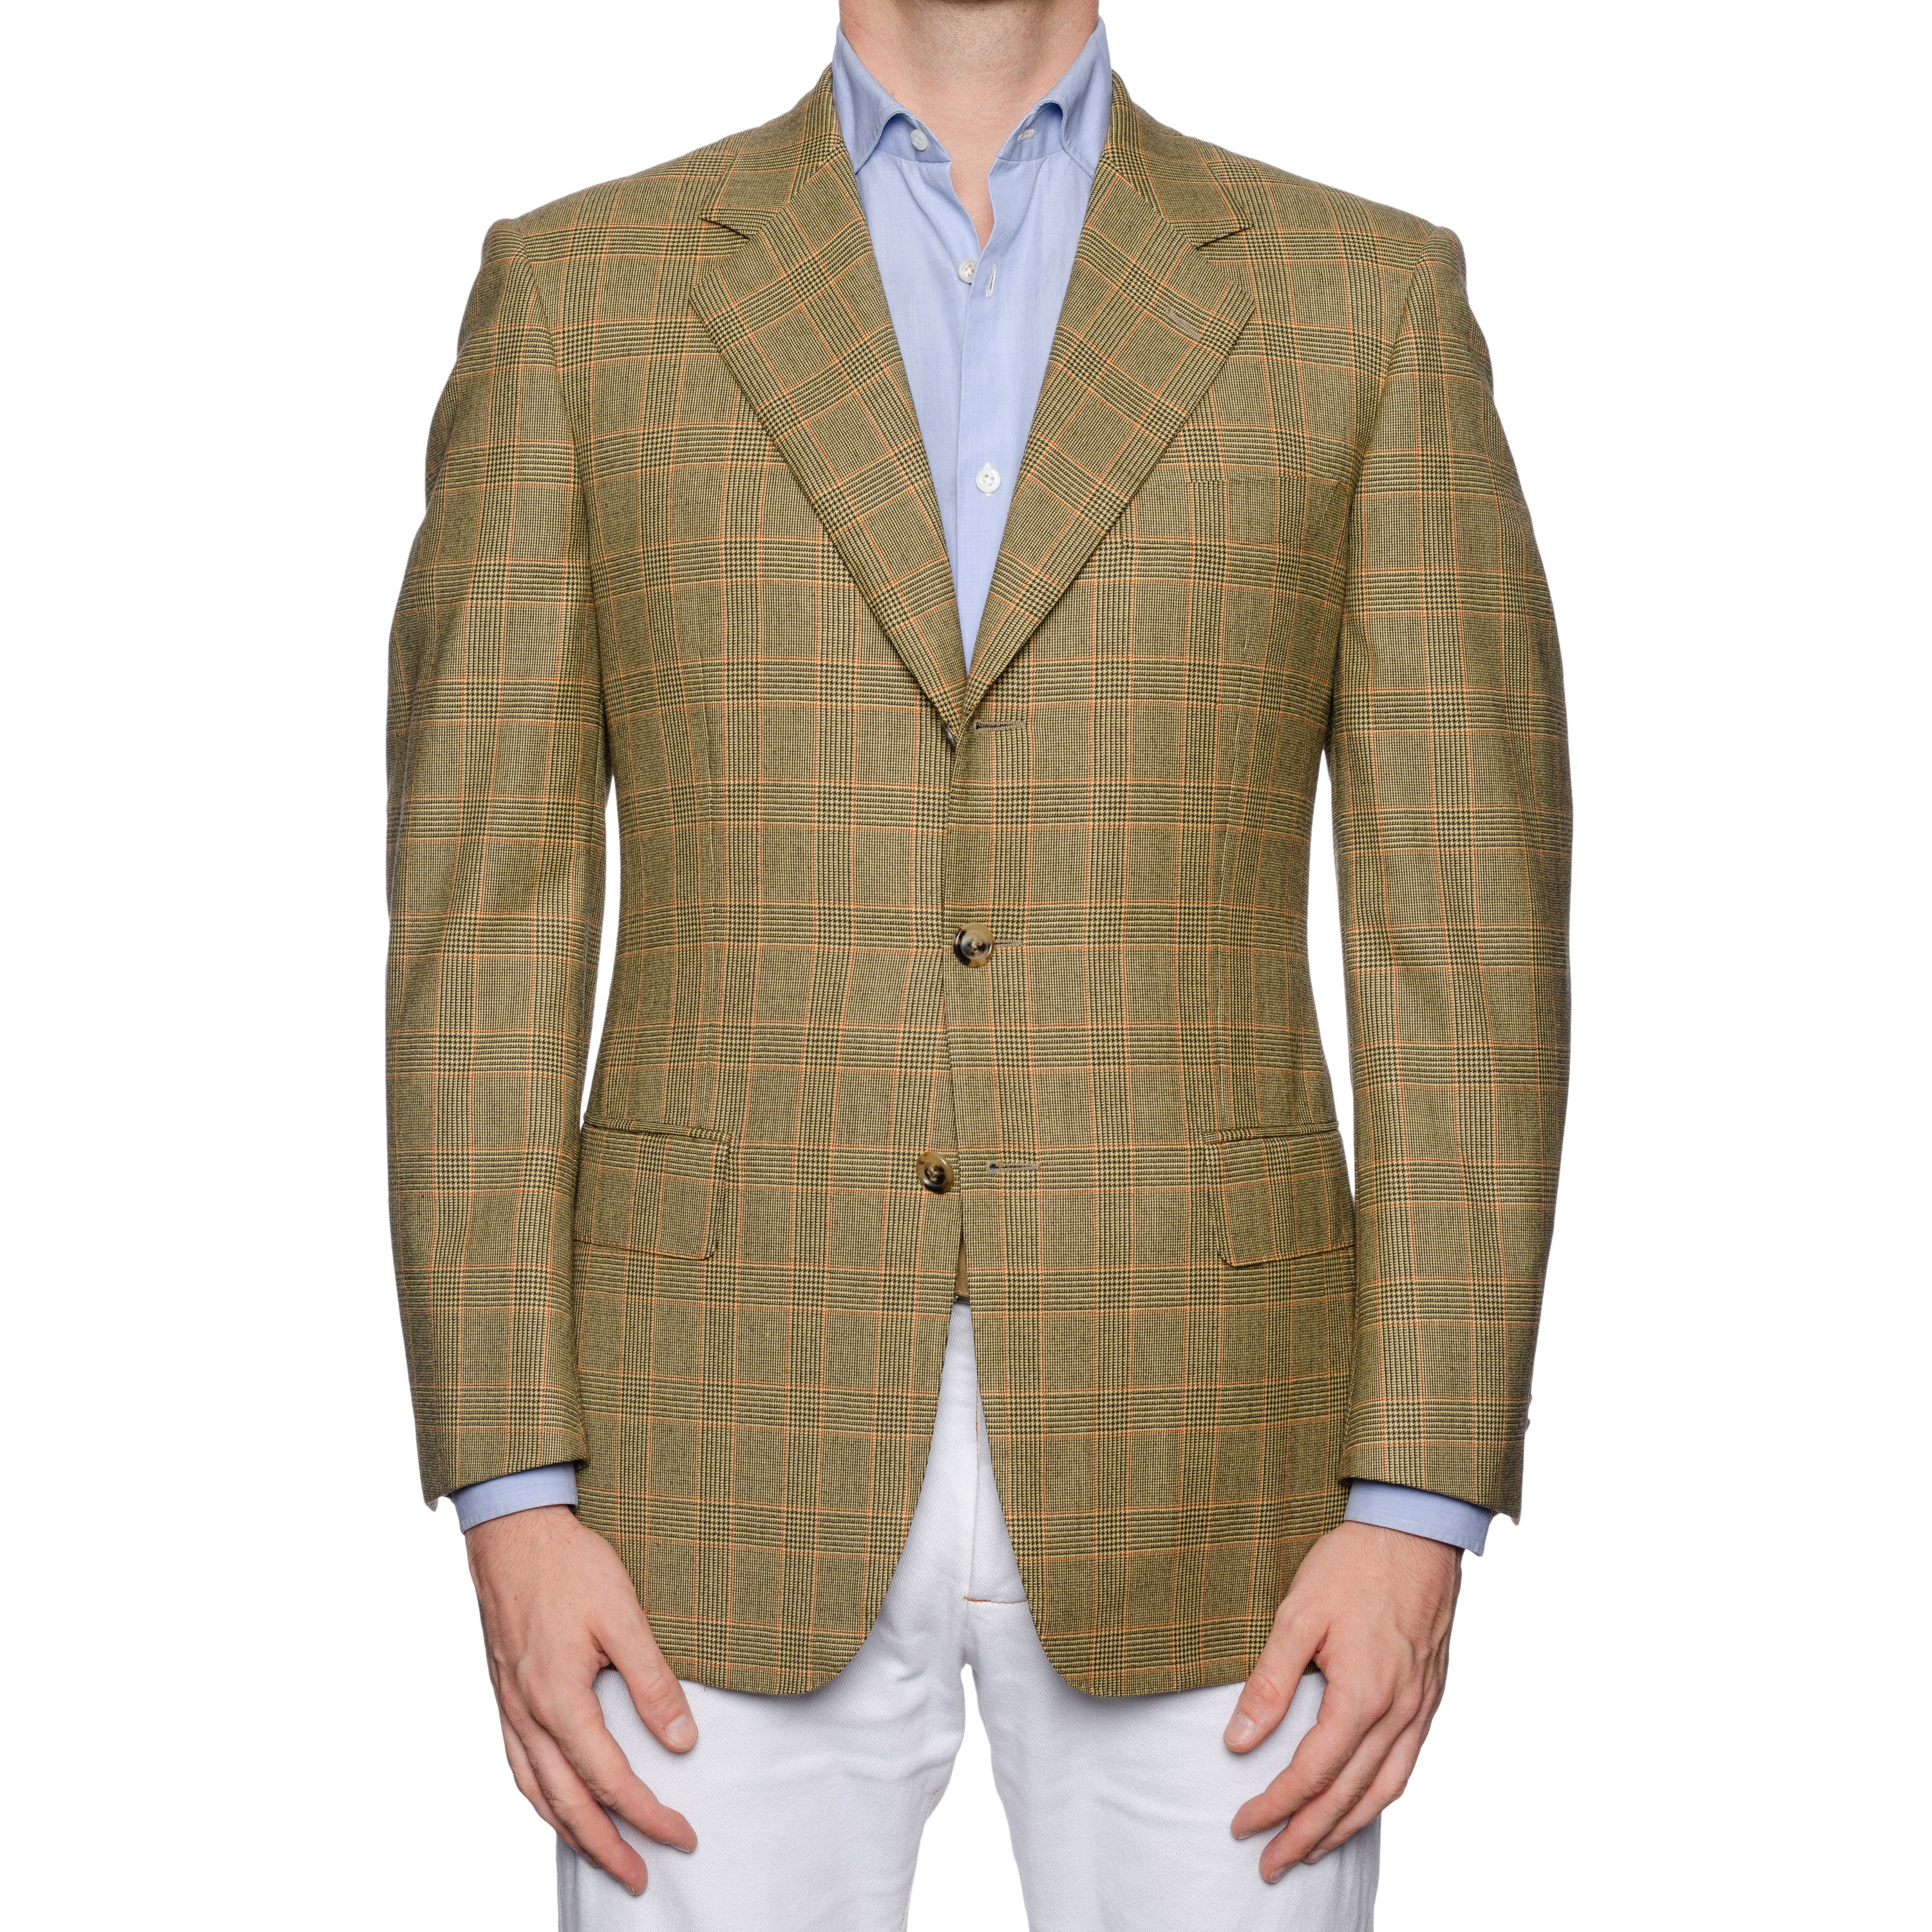 CASTANGIA 1850 Light Olive Prince of Wales Wool Sport Coat Jacket 48 NEW US 38 CASTANGIA